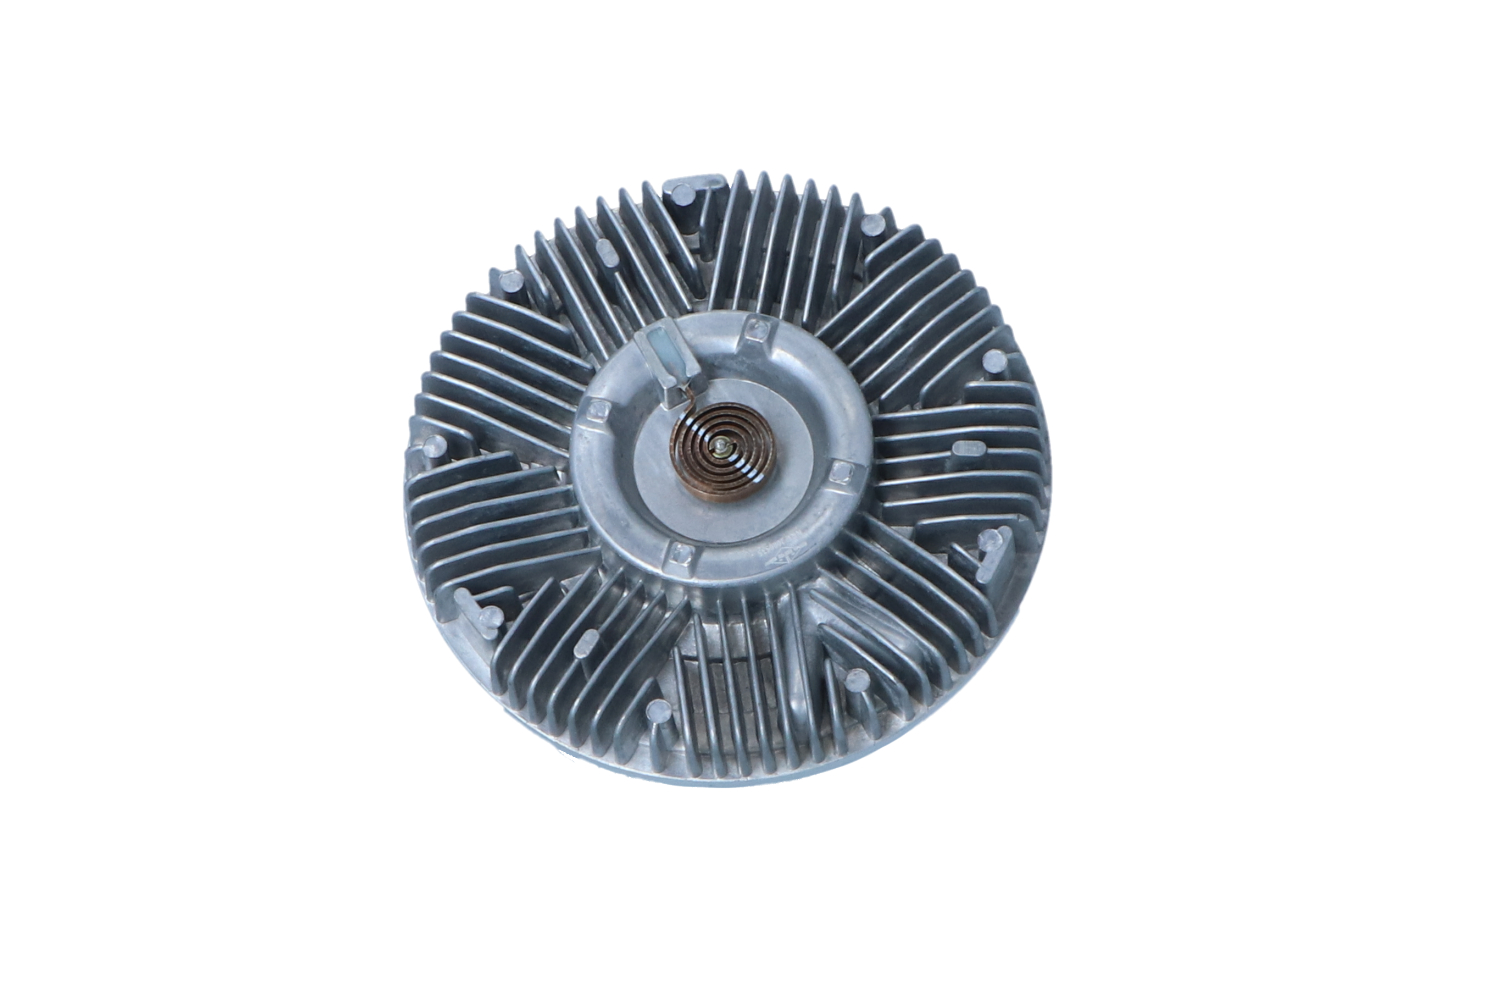 NRF 49596 Fan clutch CHRYSLER experience and price